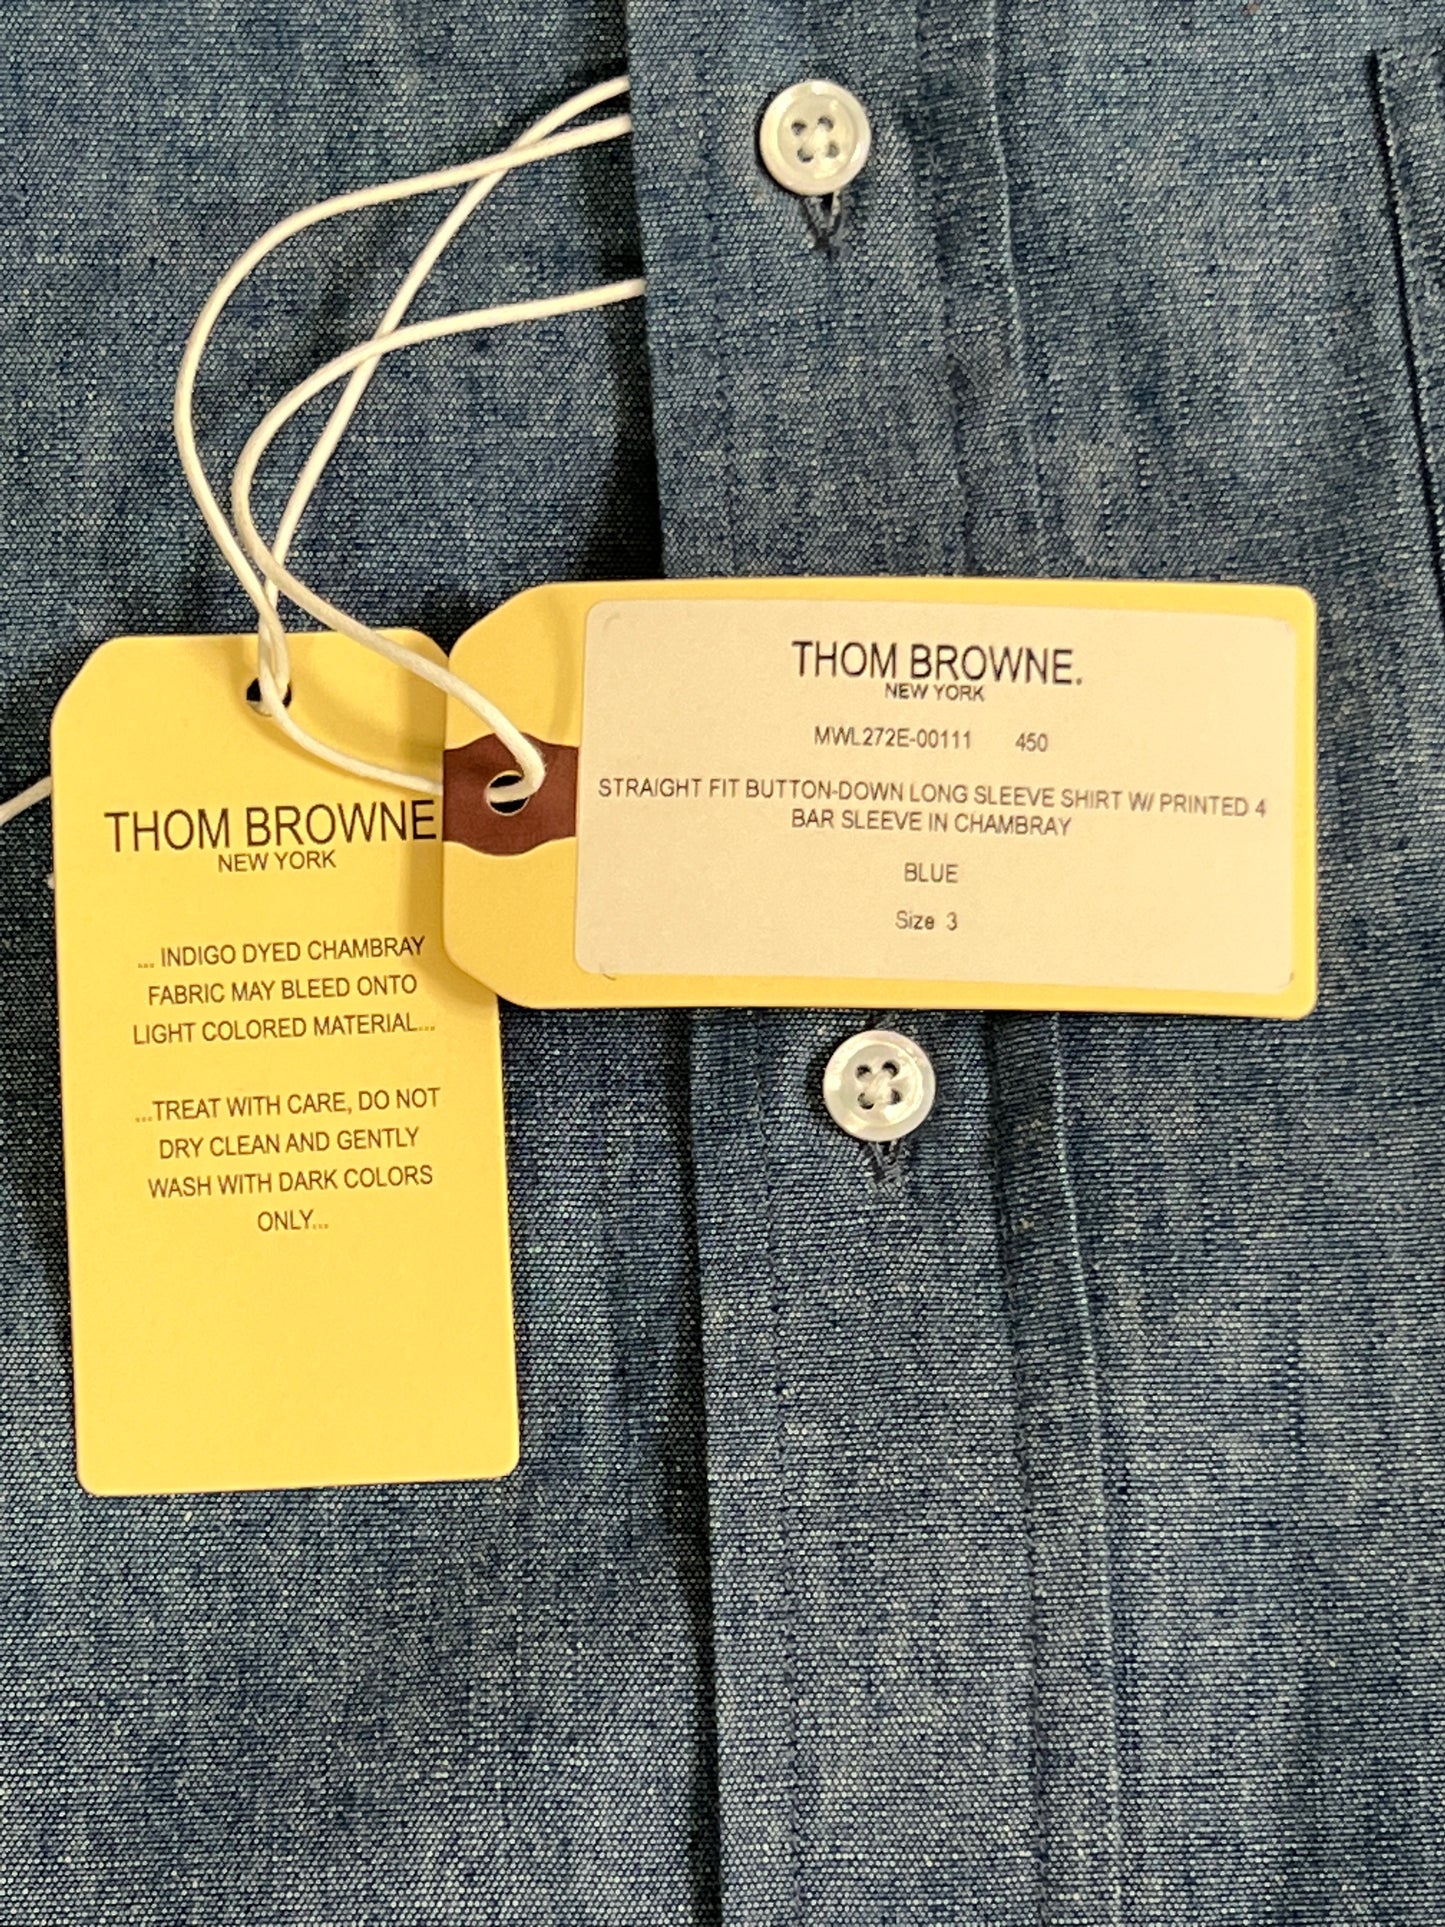 THOM BROWNE Straight Fit Button-Down Long Sleeve Shirt w/printed 4 Bar Sleeve in Chambray Blue Size 3 (NEW)